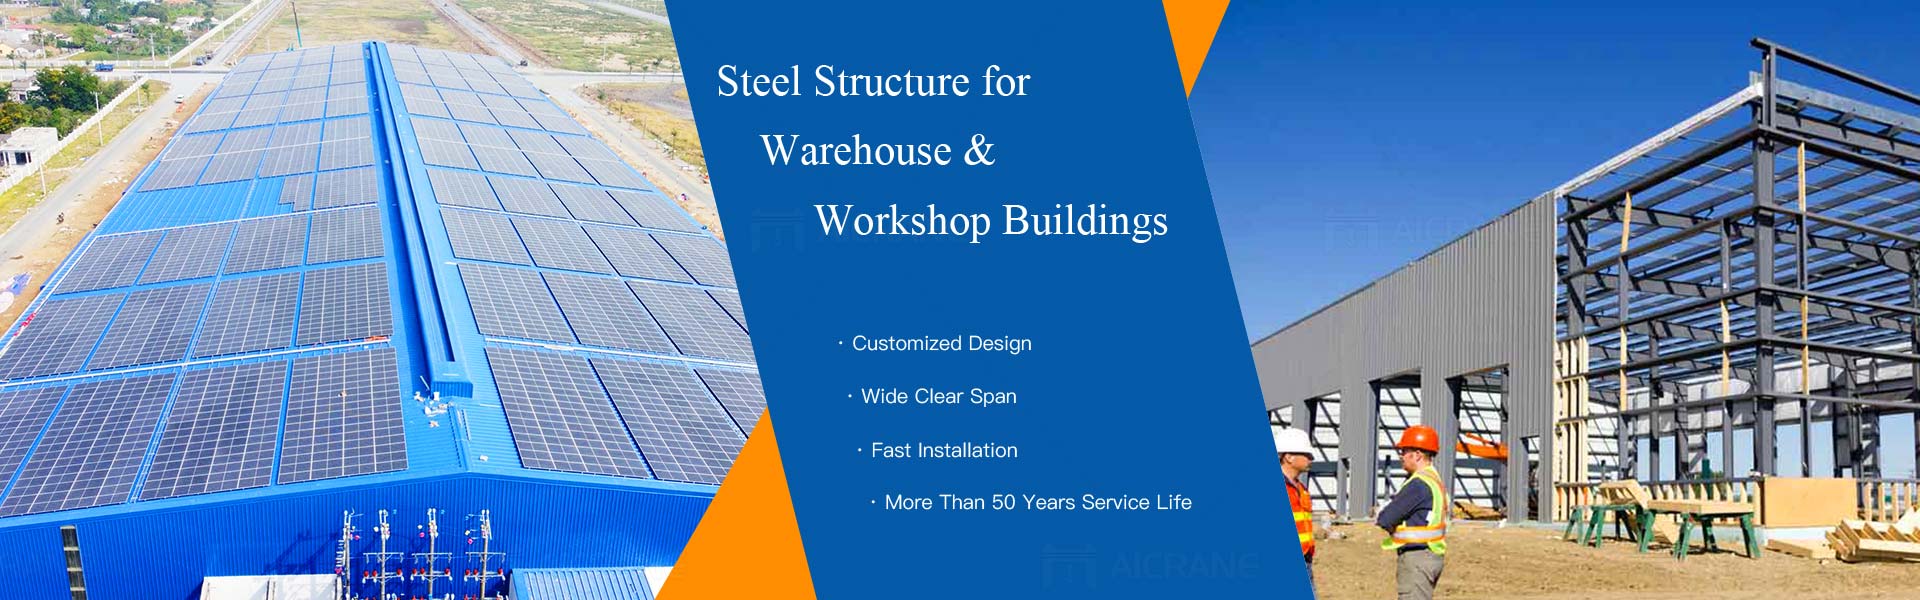 Reliable Portable Office Solutions: SAMAN, the Top <a href='/prefabricated-steel-structure/'>Prefabricated Steel Structure</a> Manufacturer in India